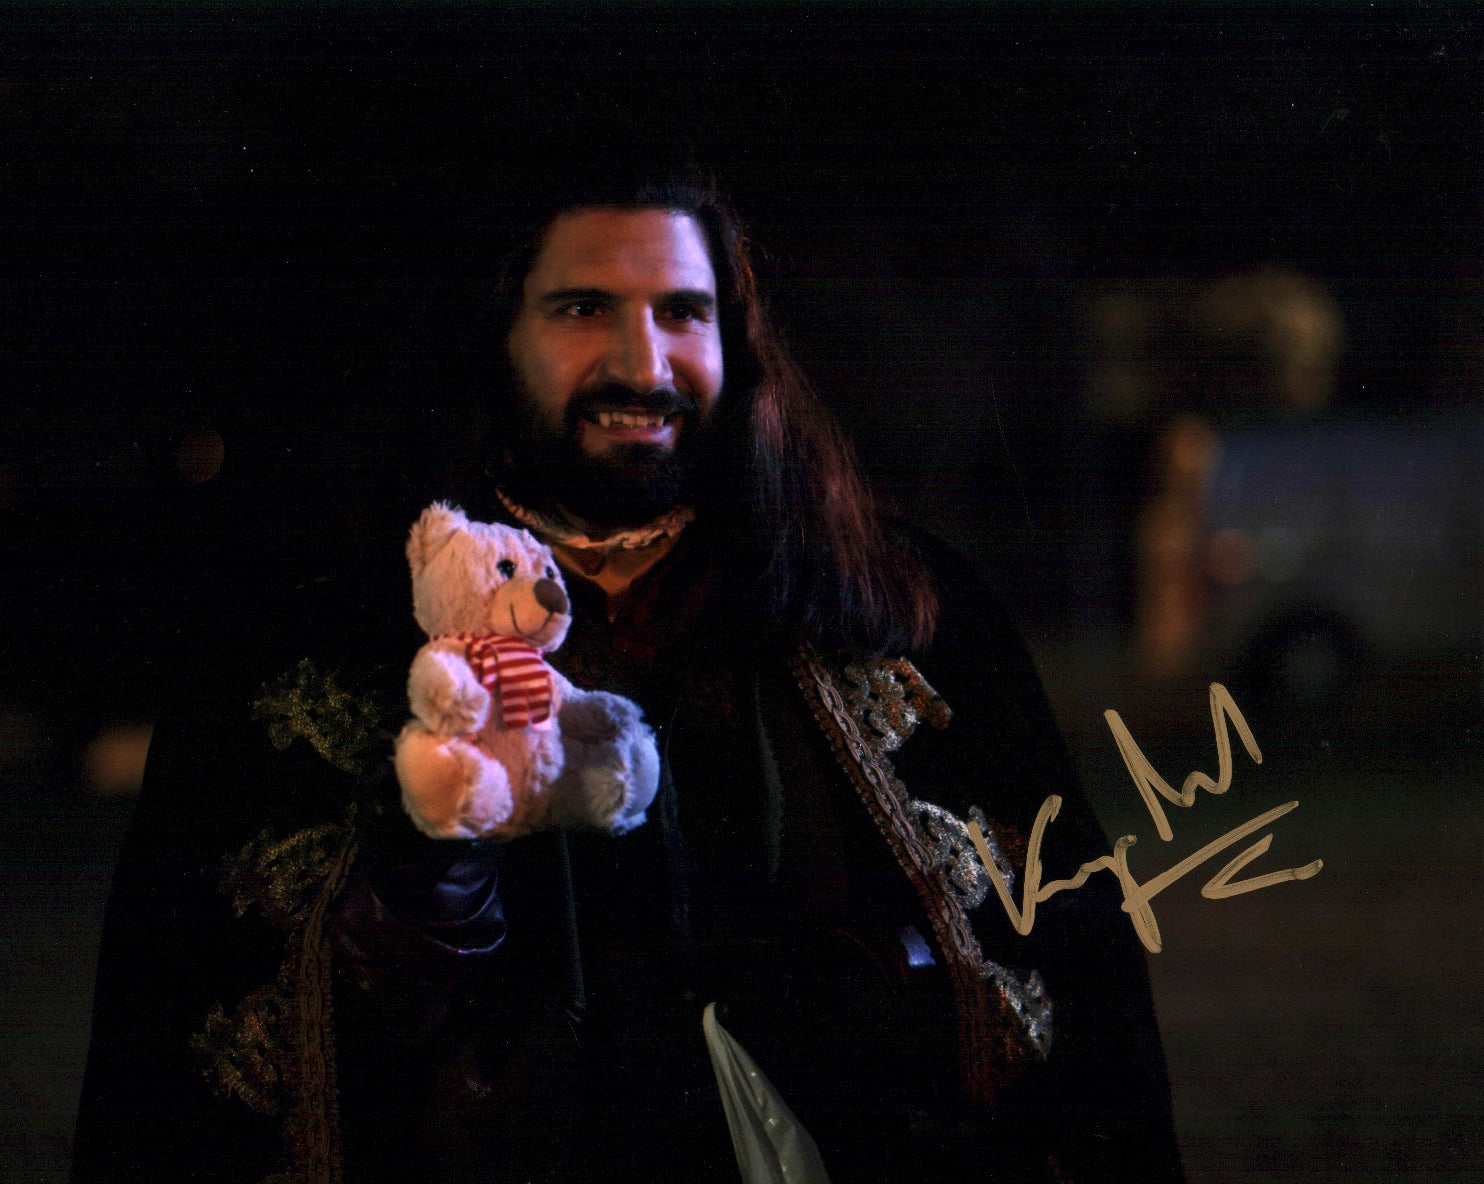 Kayvan Novak What We Do in the Shadows 11x14 Photo Poster JSA COA Certified Autograph GalaxyCon